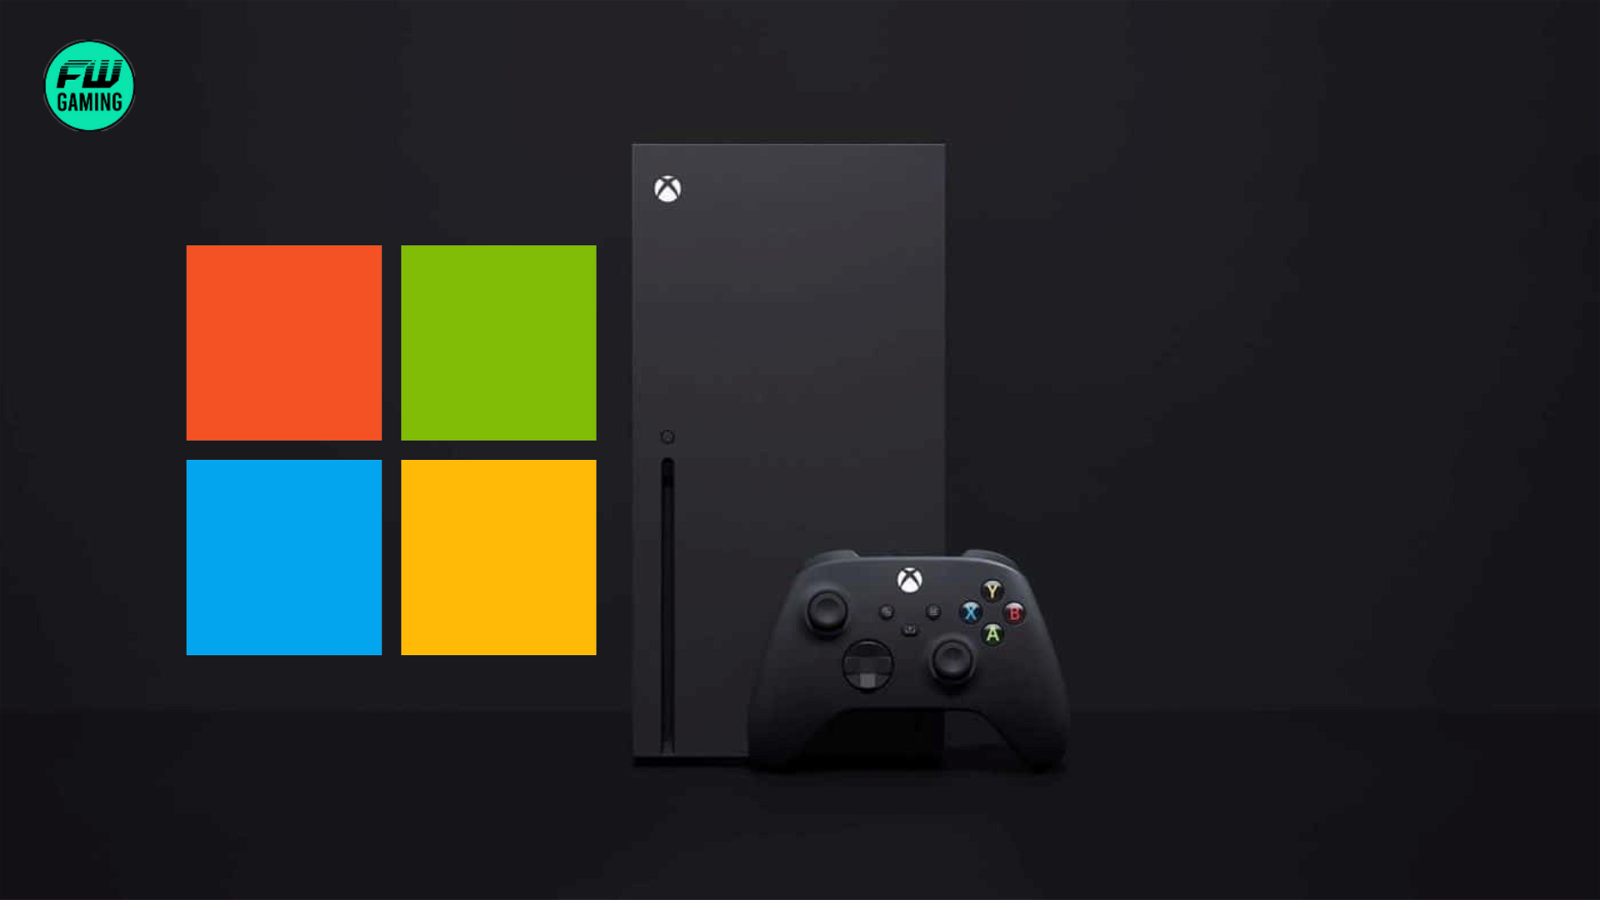 Microsoft Shifts Focus From Xbox One Consoles to Game Pass and